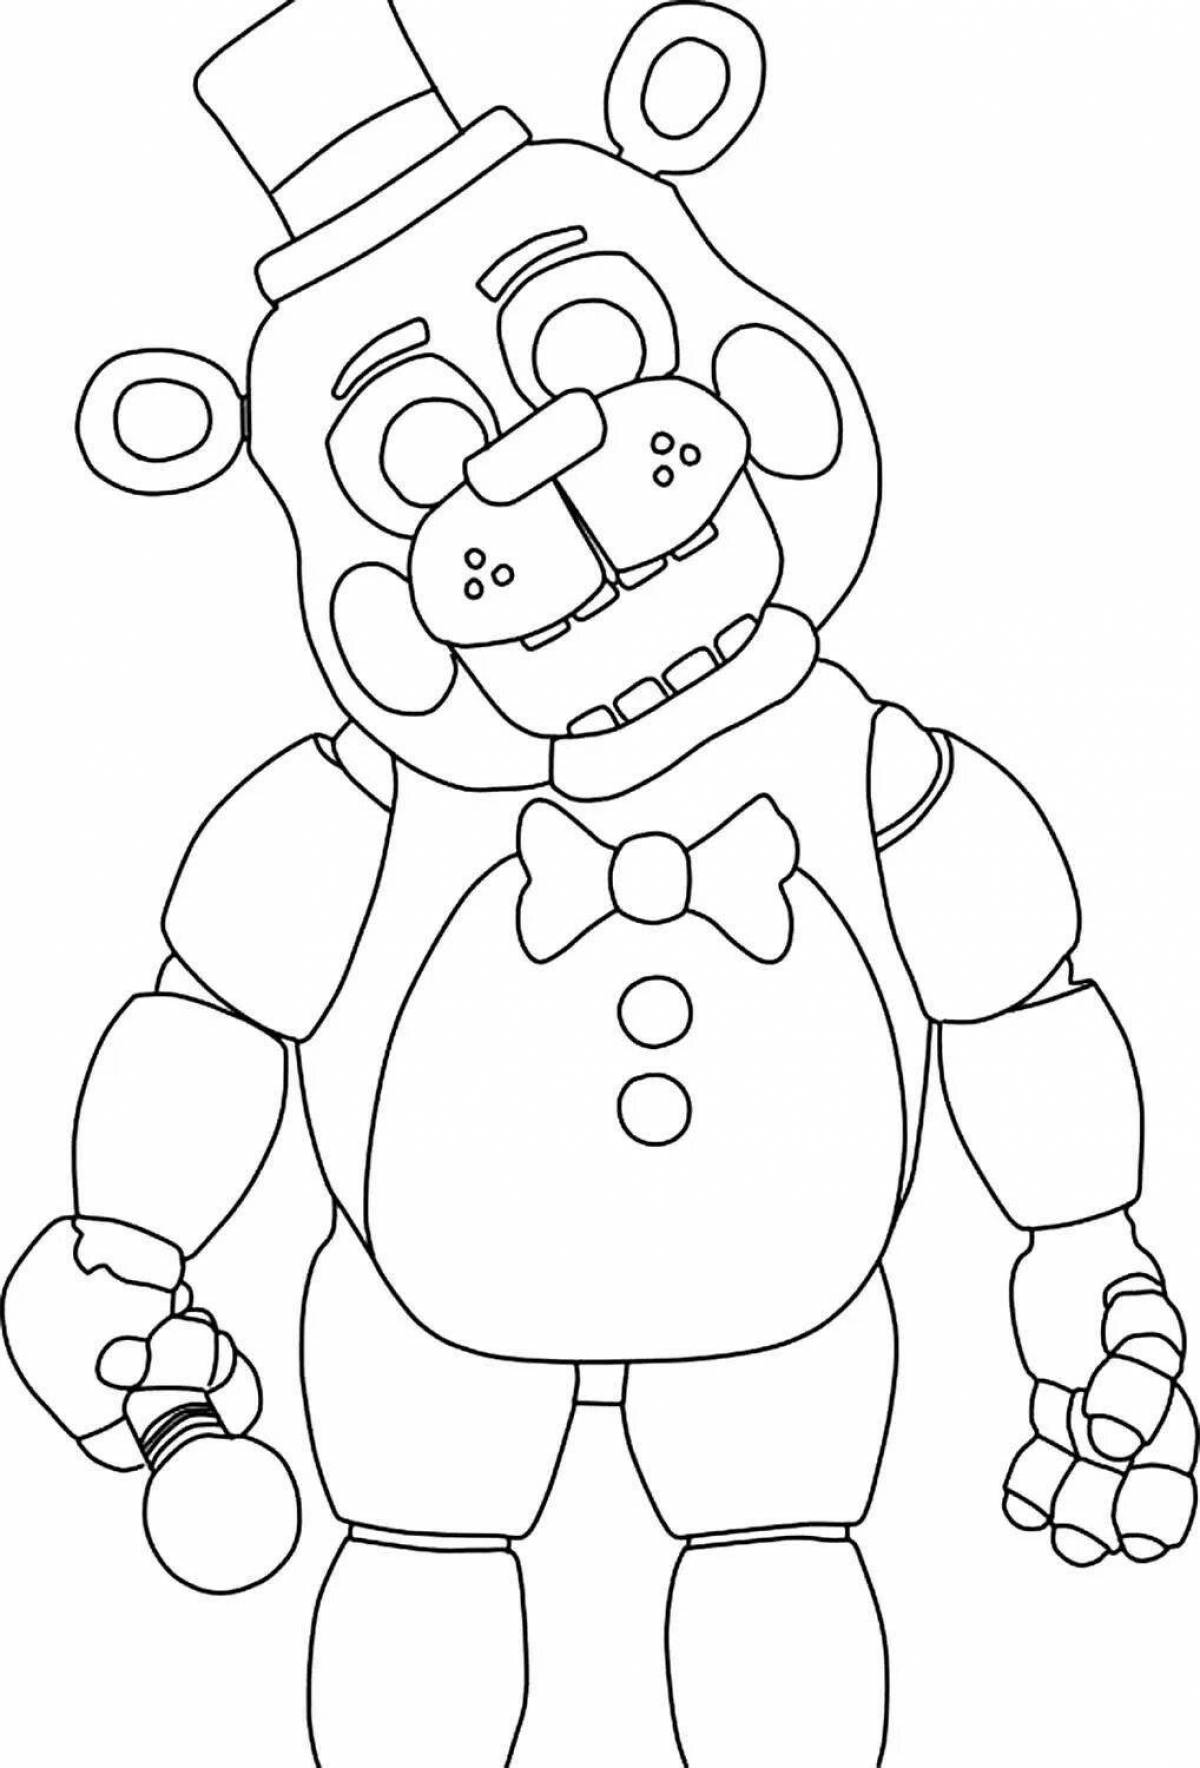 Bright fnaf official coloring